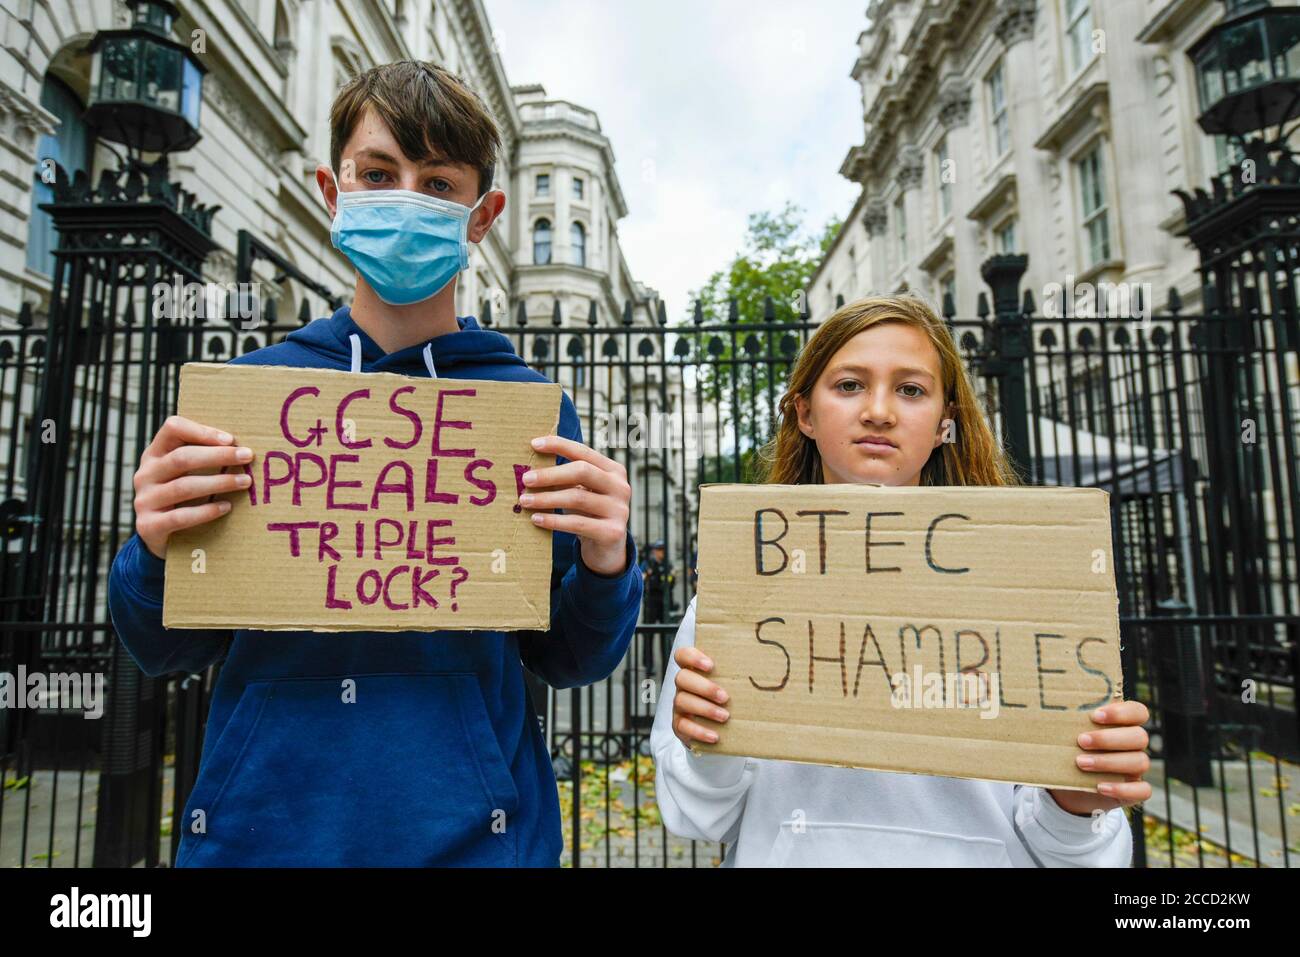 London, UK.  21 August 2020. GCSE and BTec student Tommy Walsh (L) (aged 16), supported by his sister Rosa (aged 11), join students protesting outside Downing Street calling for the resignation of Gavin Williamson, Secretary for Education, following this year’s exam results chaos.  After a successful campaign for A-Level and GCSE students to have grades based on teacher assessments rather than on a computer algorithm, BTec students will have to wait while exam board Pearson regrades their results.  (Parental permission obtained)  Credit: Stephen Chung / Alamy Live News Stock Photo